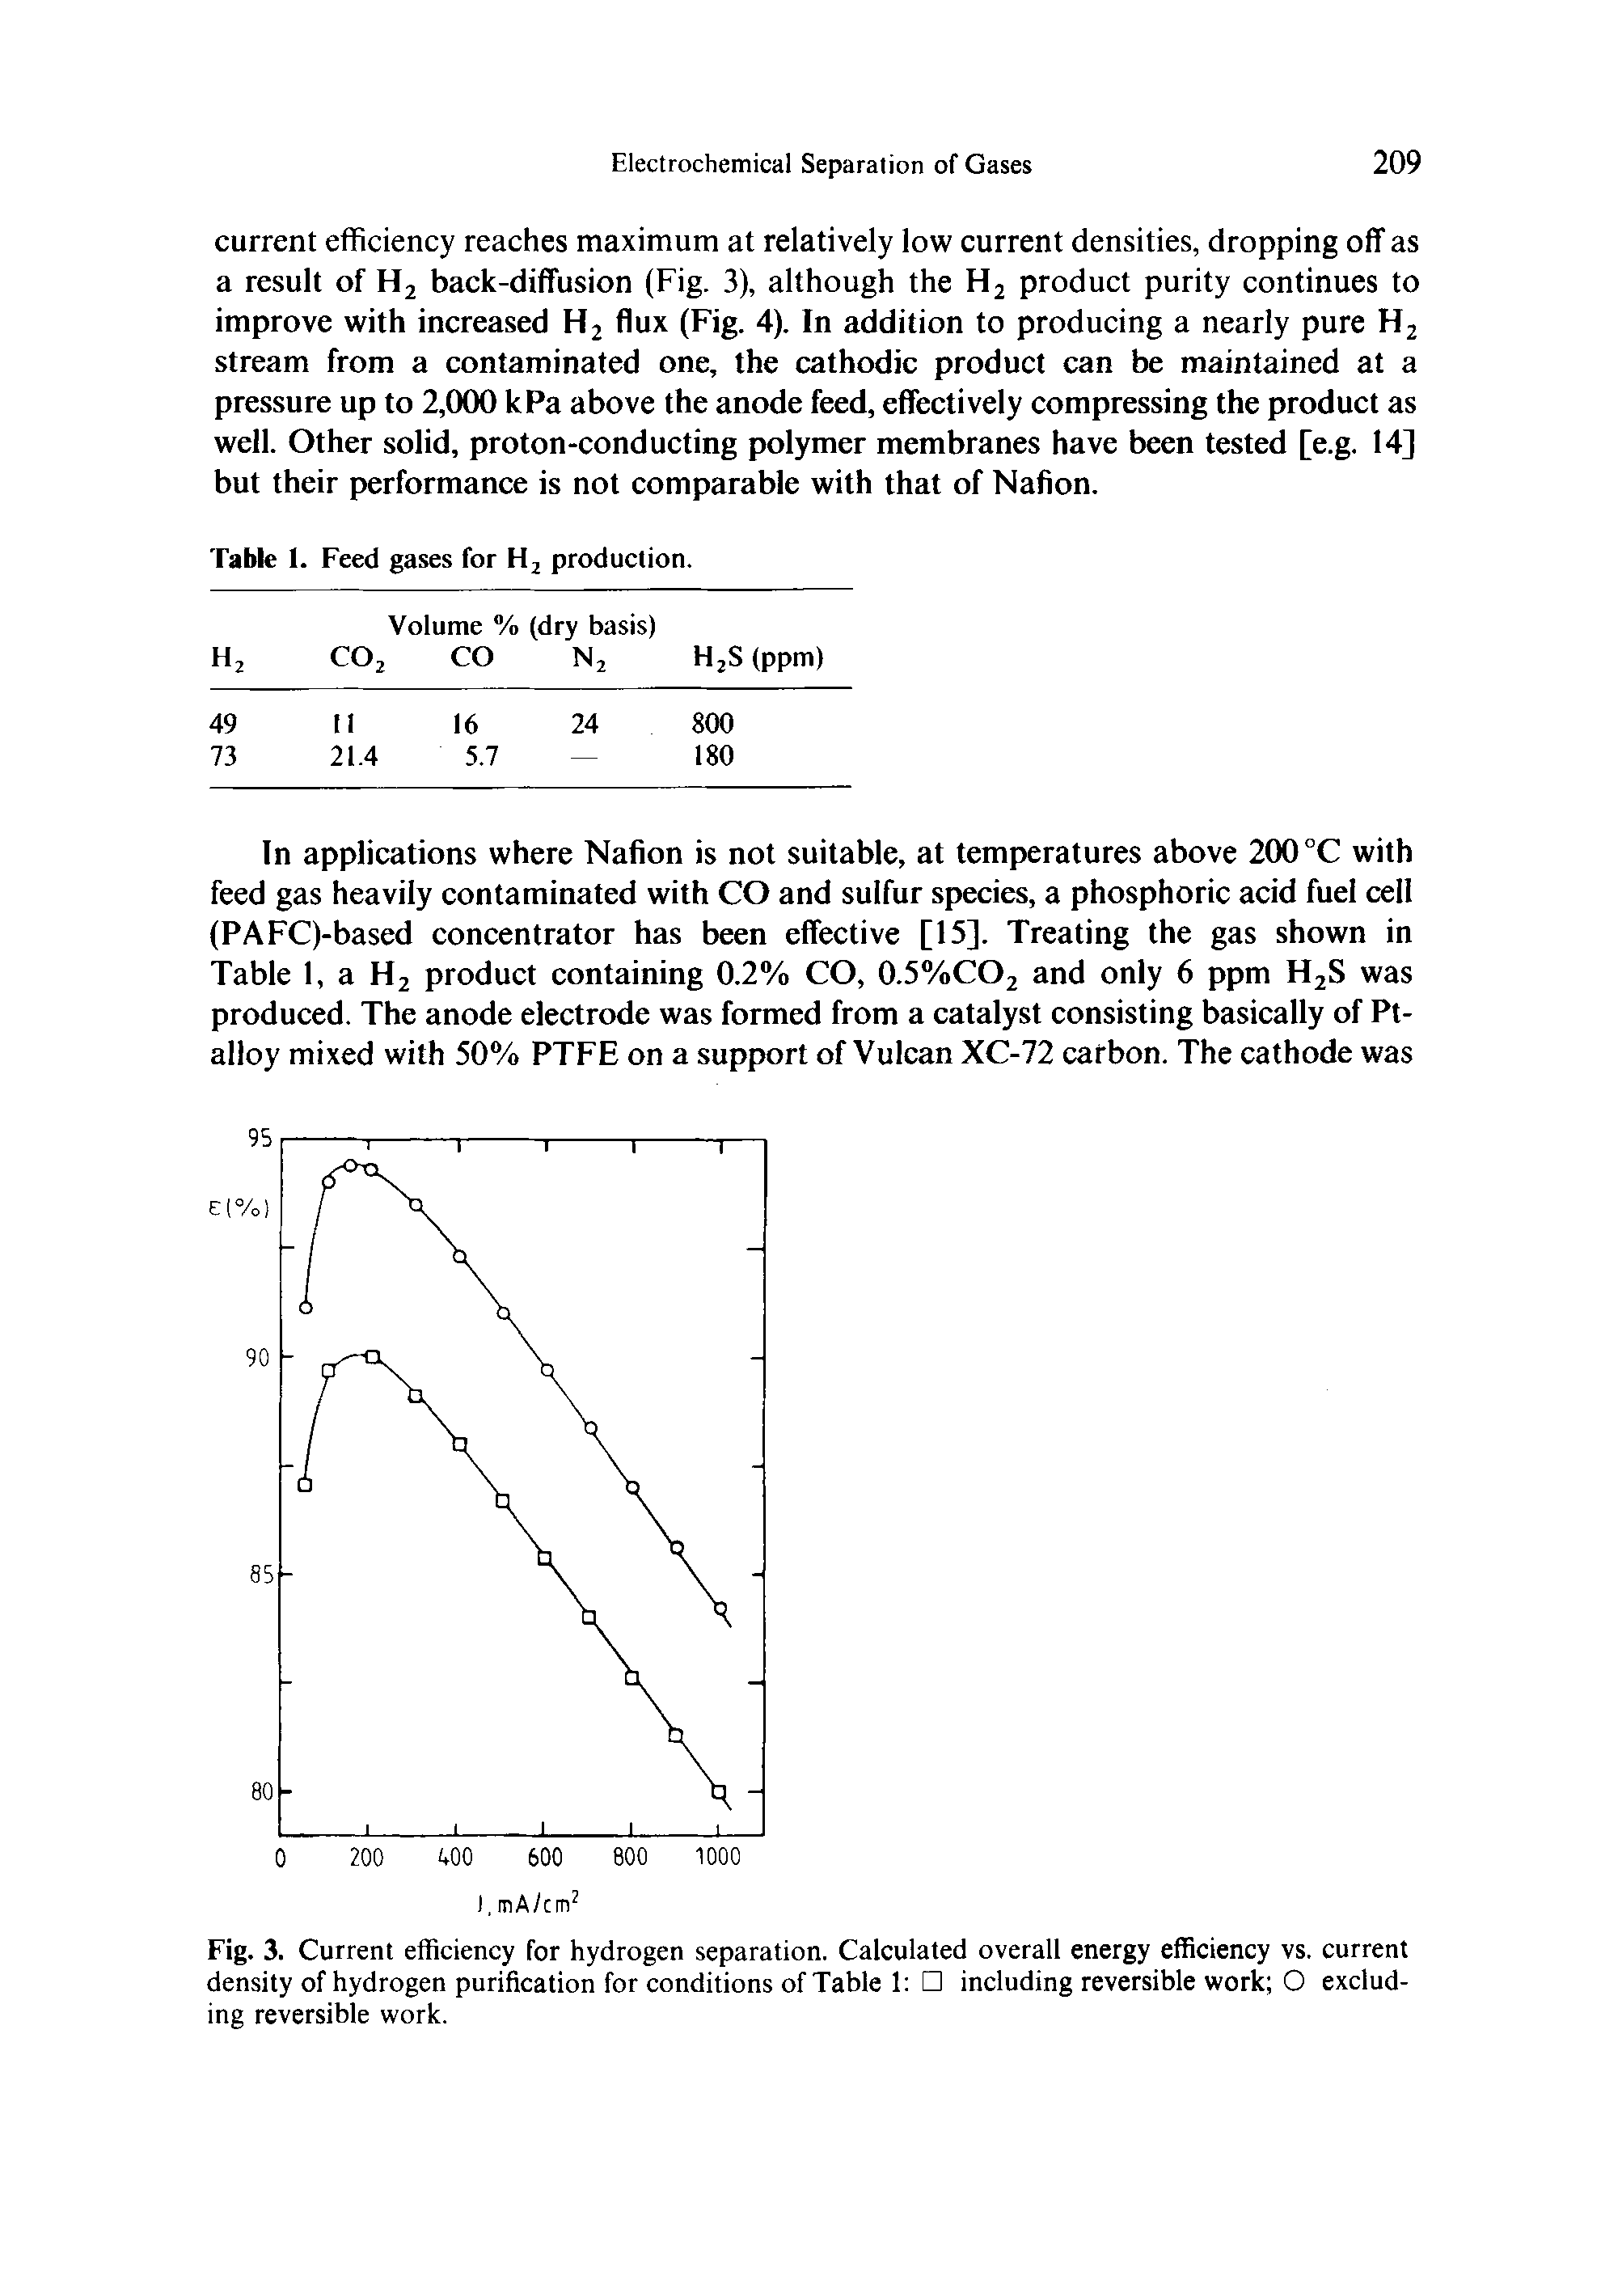 Fig. 3. Current efficiency for hydrogen separation. Calculated overall energy efficiency vs. current density of hydrogen purification for conditions of Table 1 including reversible work O excluding reversible work.